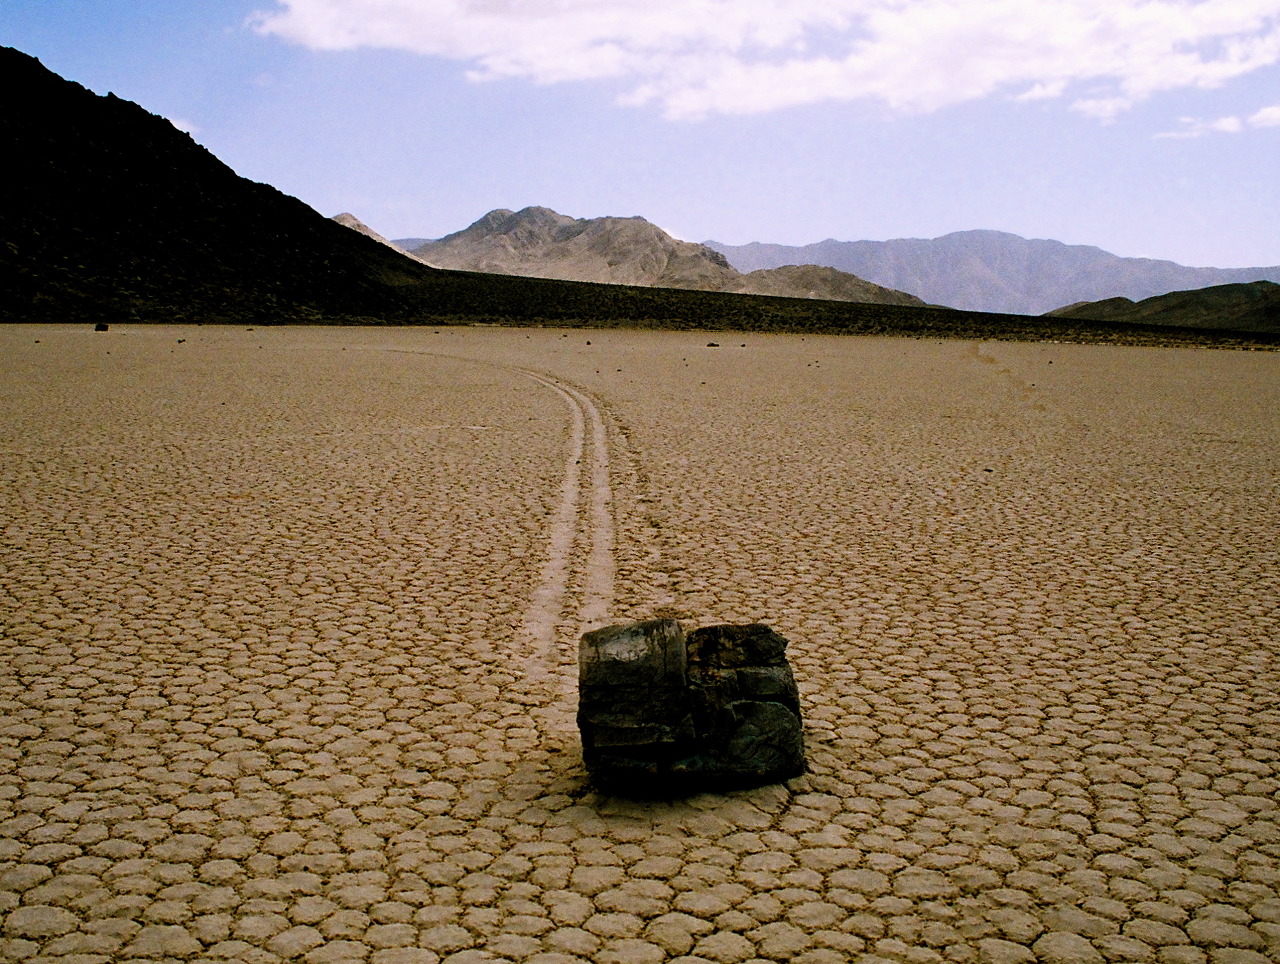 Racetrack Playa, Death Valley
“ The sailing stones are a geological phenomenon found in the Racetrack. Slabs of dolomite and syenite ranging from a few hundred grams to hundreds of kilograms inscribe visible tracks as they slide across the playa...